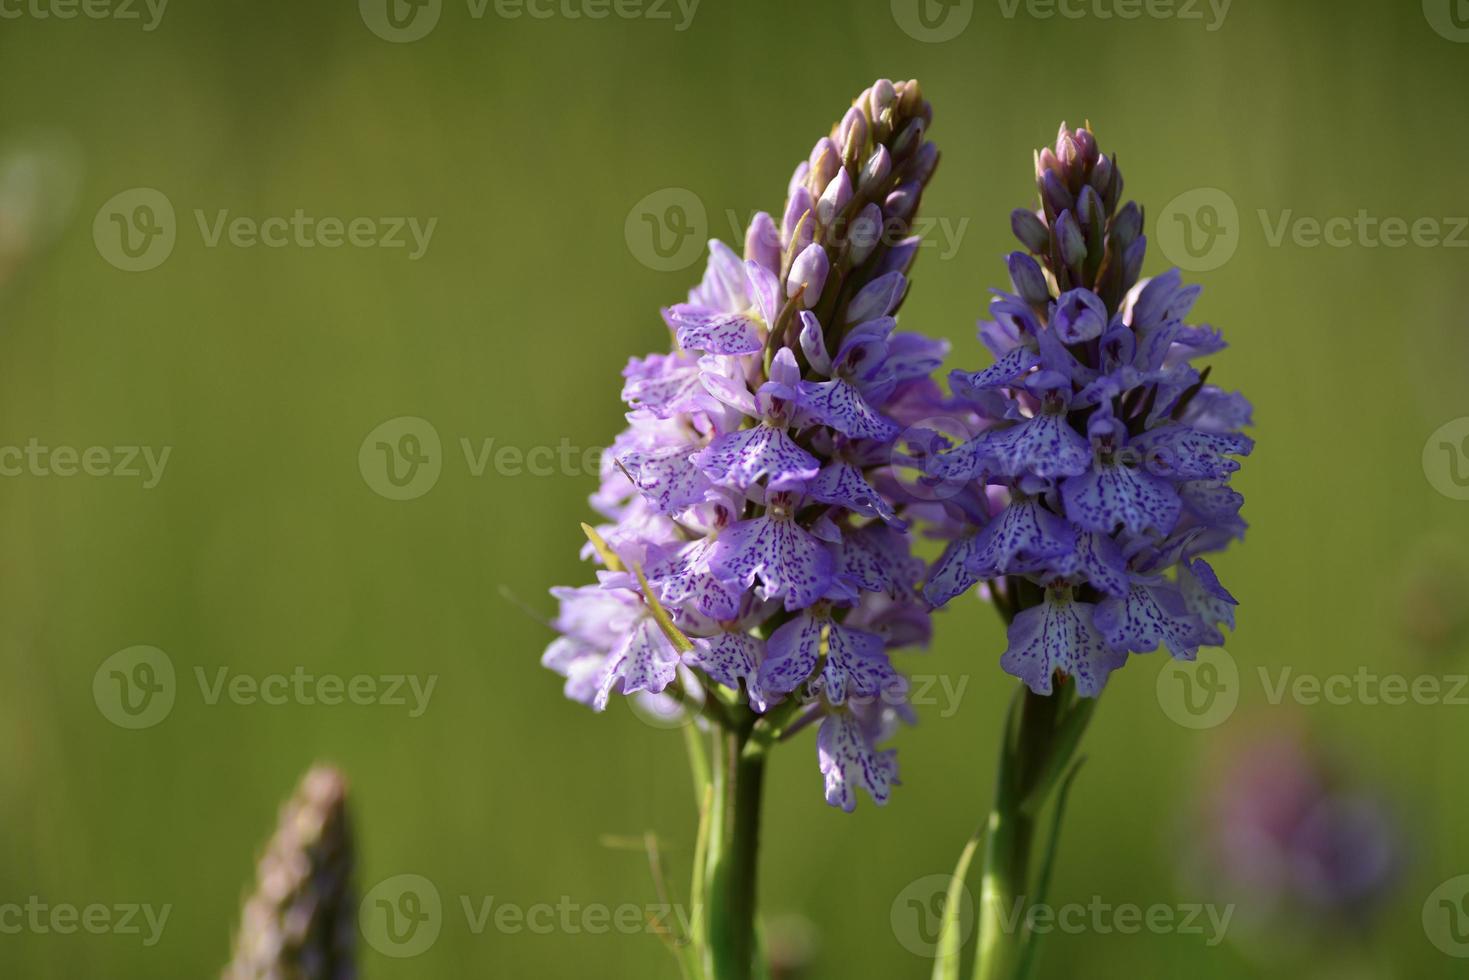 Spotted Orchid jersey UK Spring marsh wildflowers photo